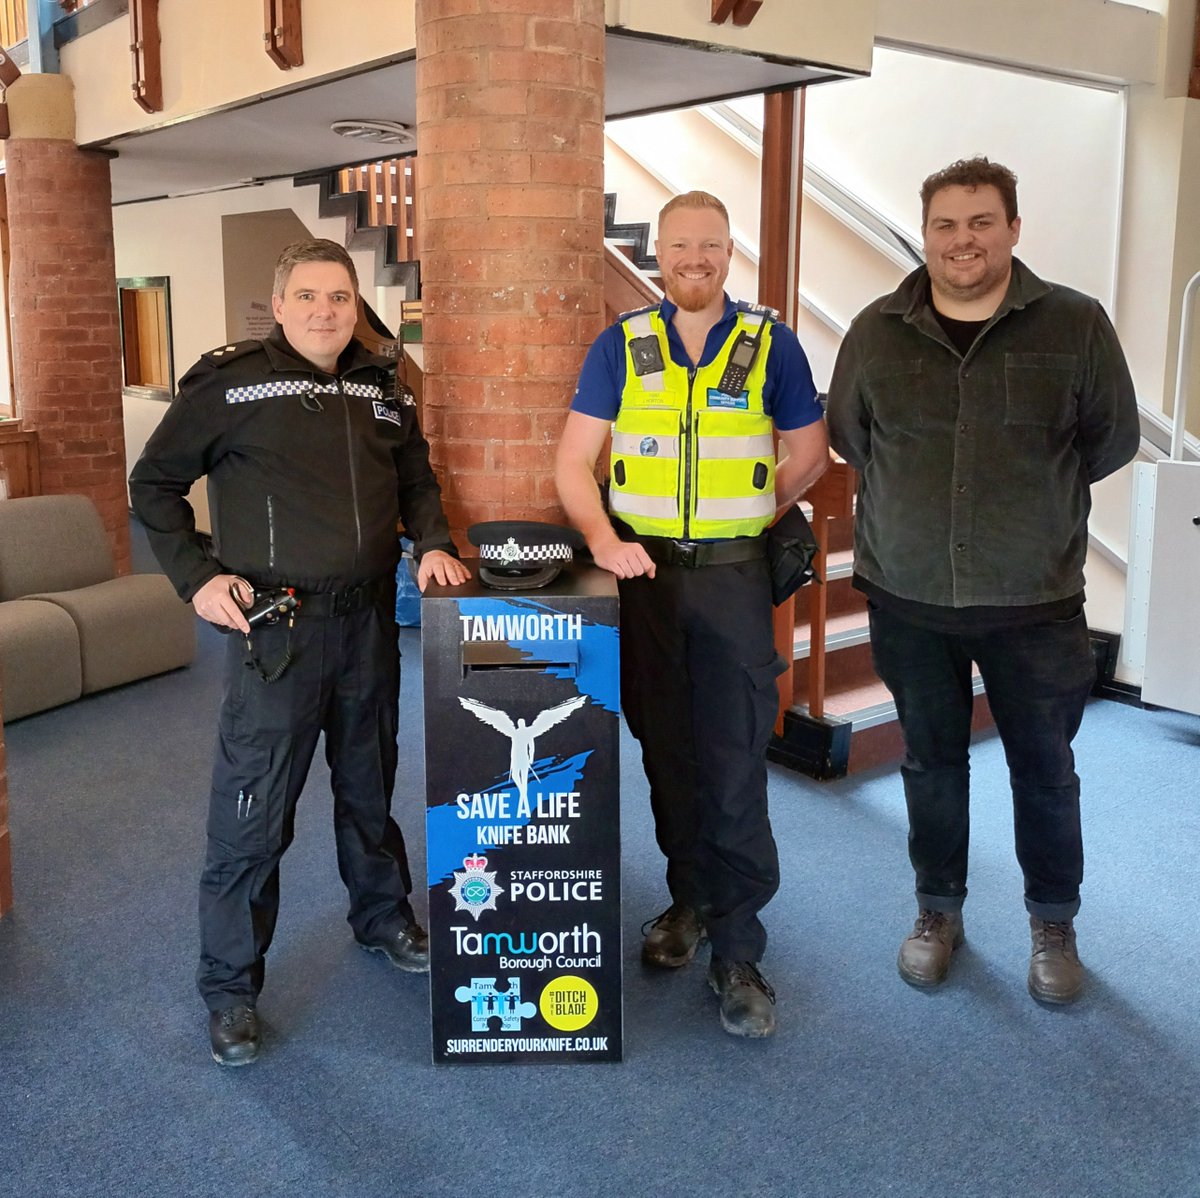 The Knife Bank has been installed at St Martins, Stonydelph where you can dispose of any found knives or ones you wish to dispose of.
For safety/security reasons the bank will be kept indoors at St Martins so will only be accessible during opening hours

#OpSceptre #DitchTheBlade